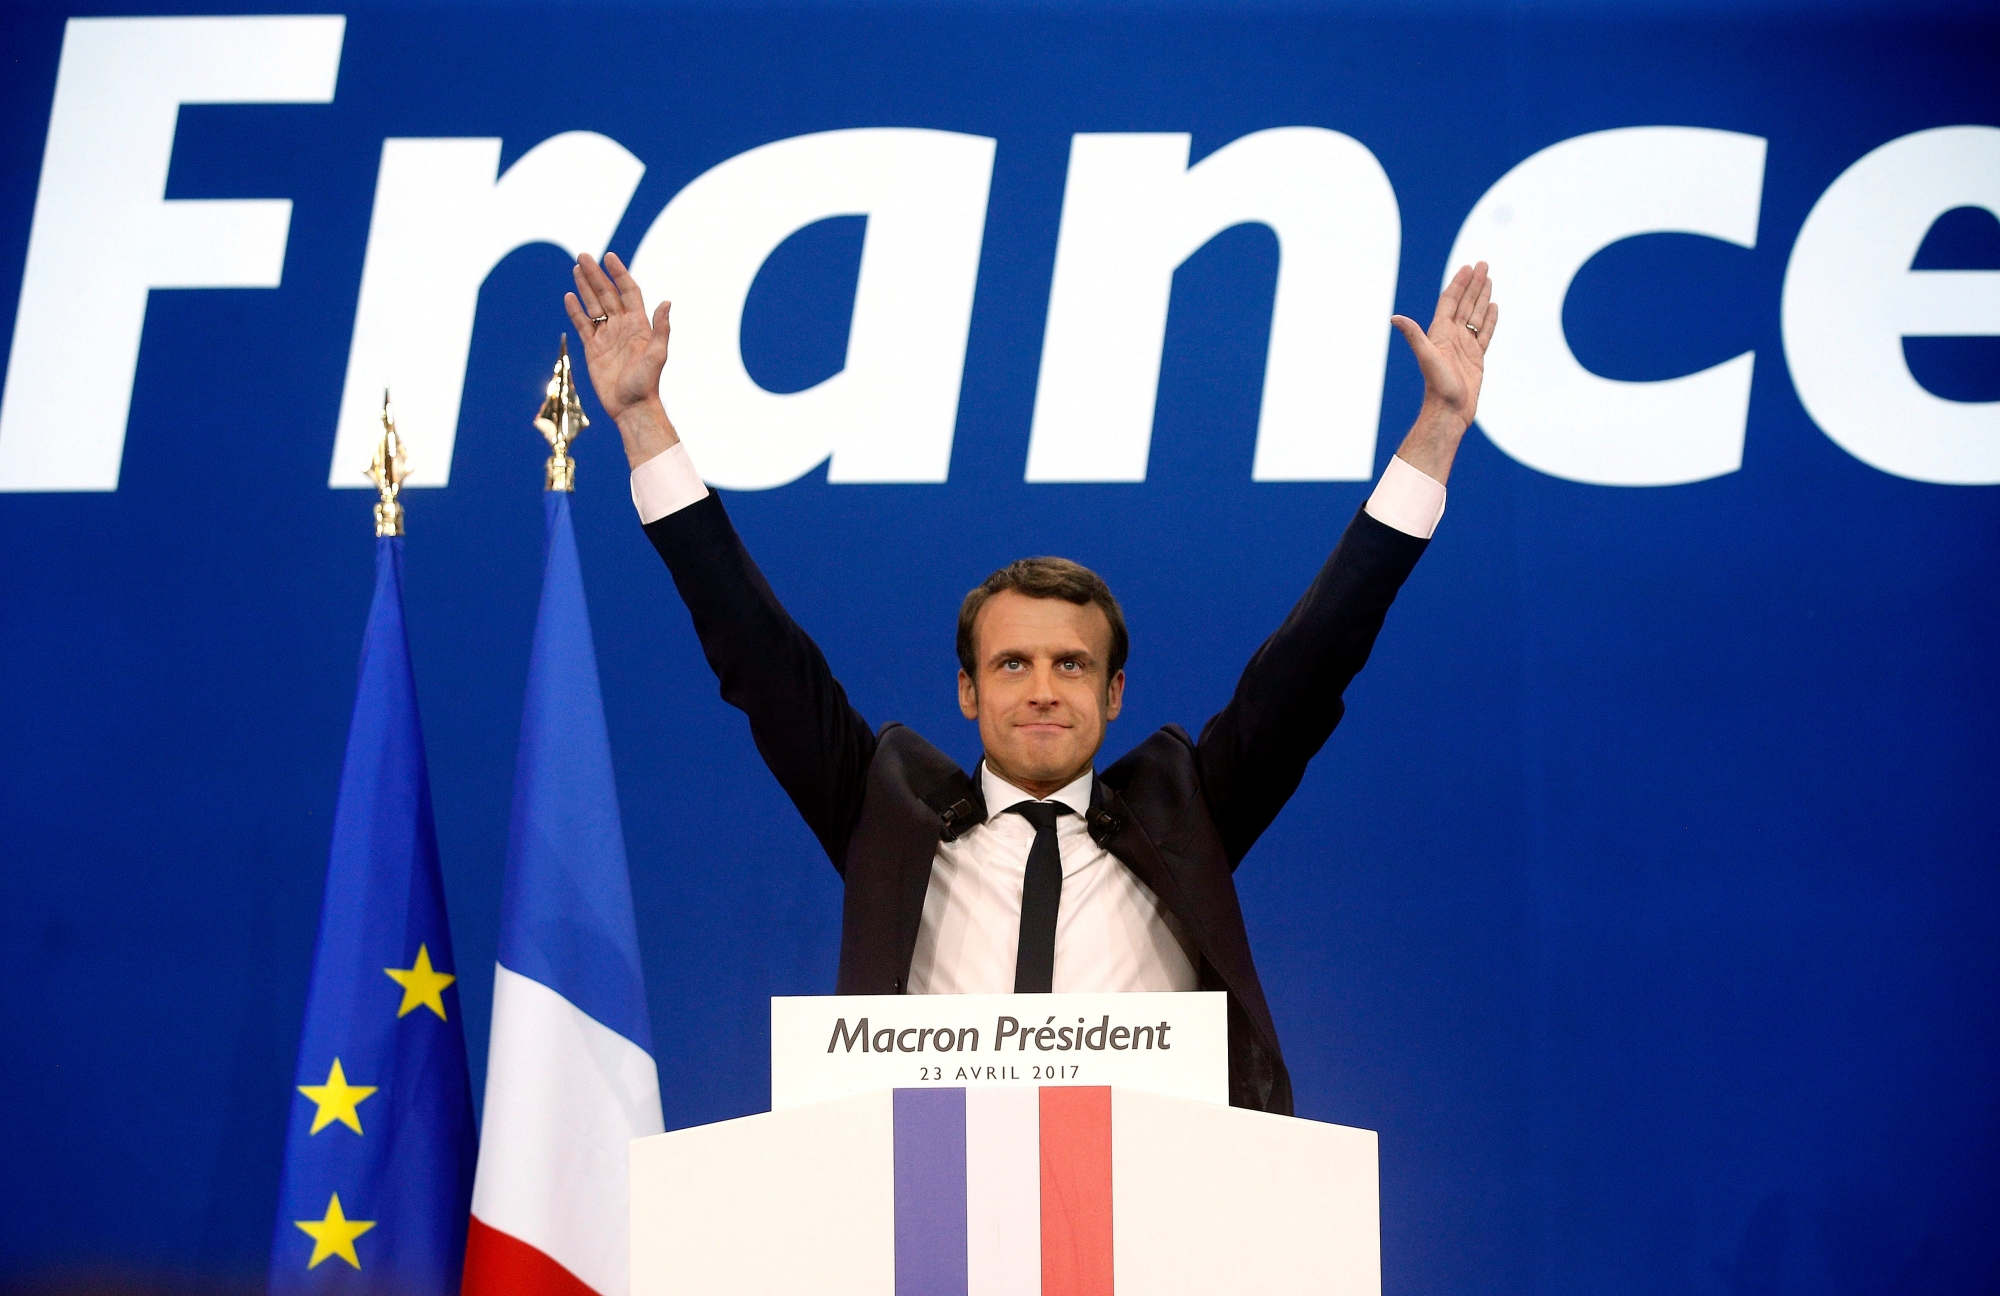 FILE - In this Sunday April 23, 2017 file photo, French centrist presidential candidate Emmanuel Macron waves before addressing his supporters at his election day headquarters in Paris. They could hardly be more different: Pro-European centrist Emmanuel Macron is facing anti-immigration, anti-EU Marine Le Pen in FranceÄôs presidential runoff May 7. (AP Photo/Thibault Camus, file) France Election Macron vs Le Pen